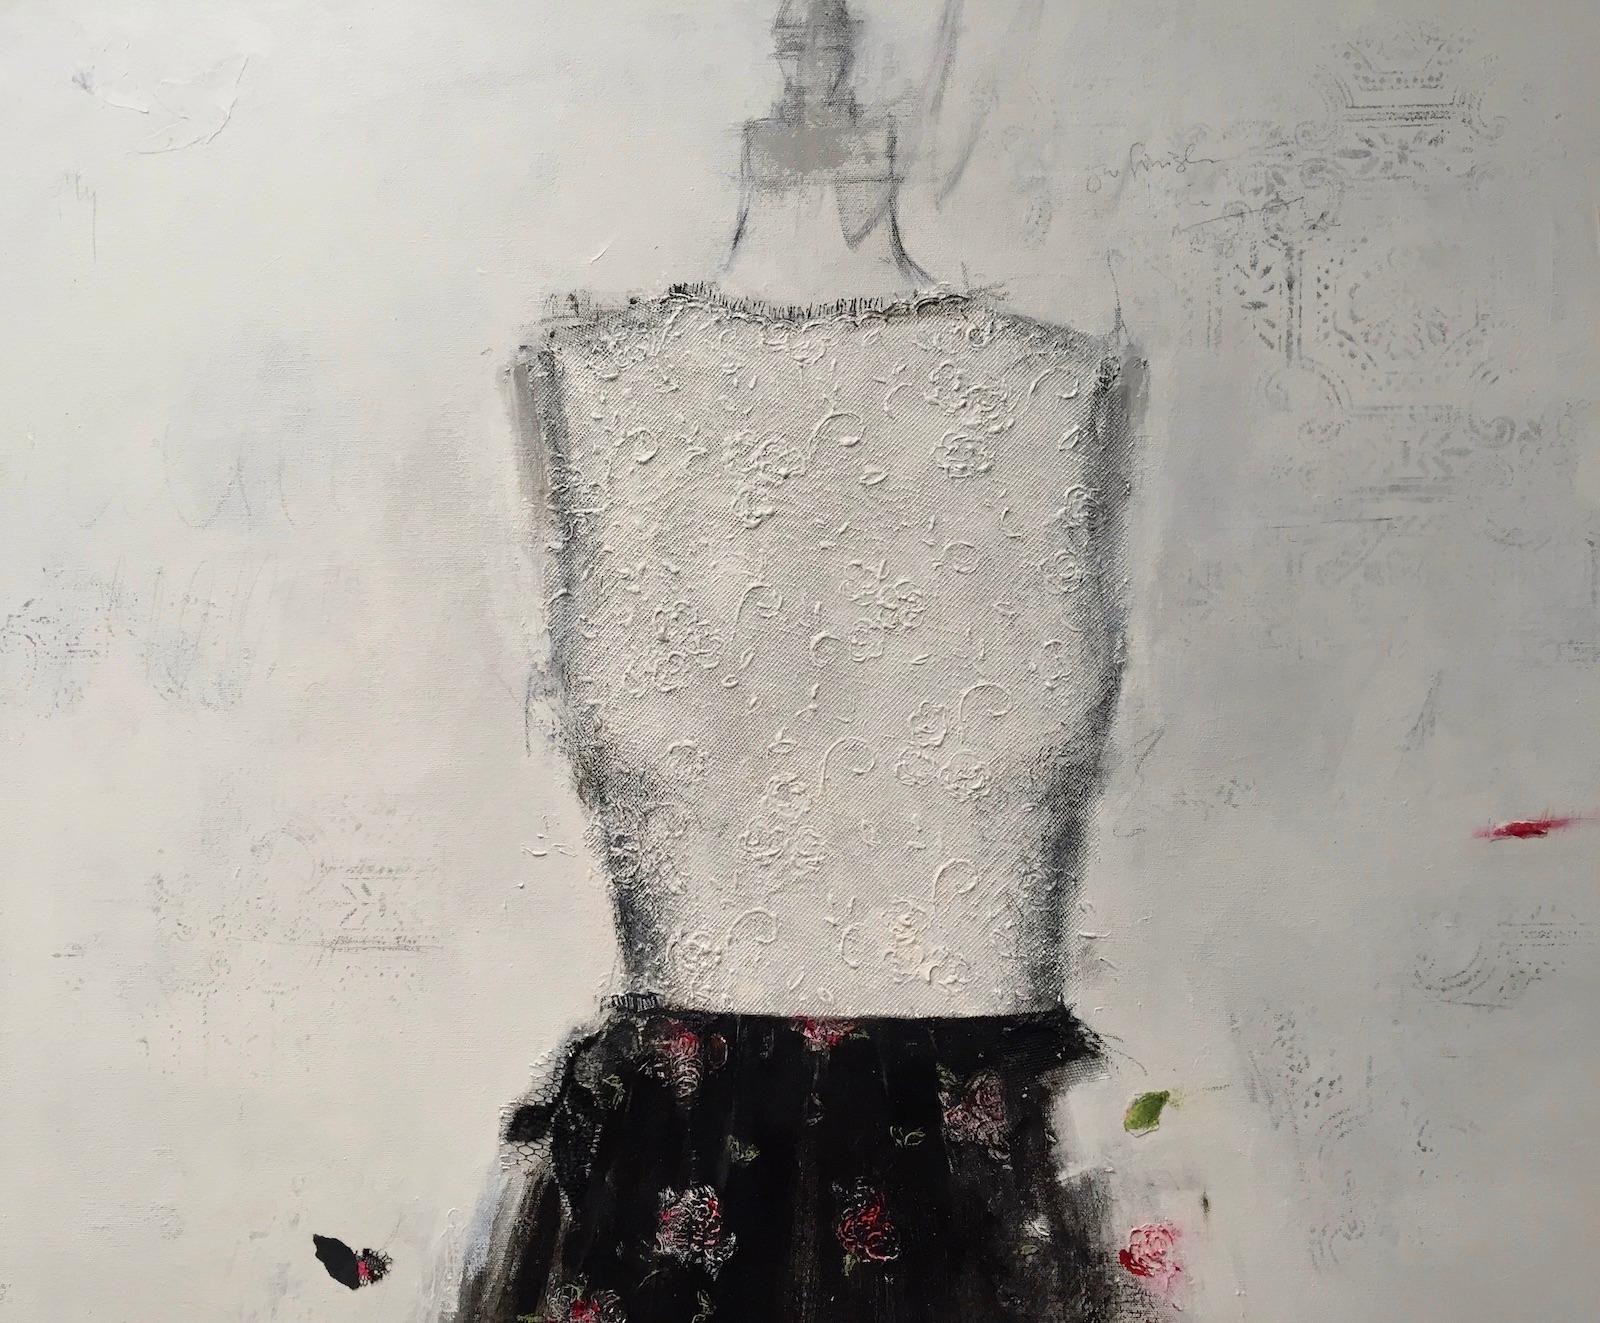 Both expressive and refined, this dress painting features an interplay of paint, pencil and textile. Textures, collage and tone on tone layering create a sense of dimension and movement. Intricate detail blends with intuitive mark-making